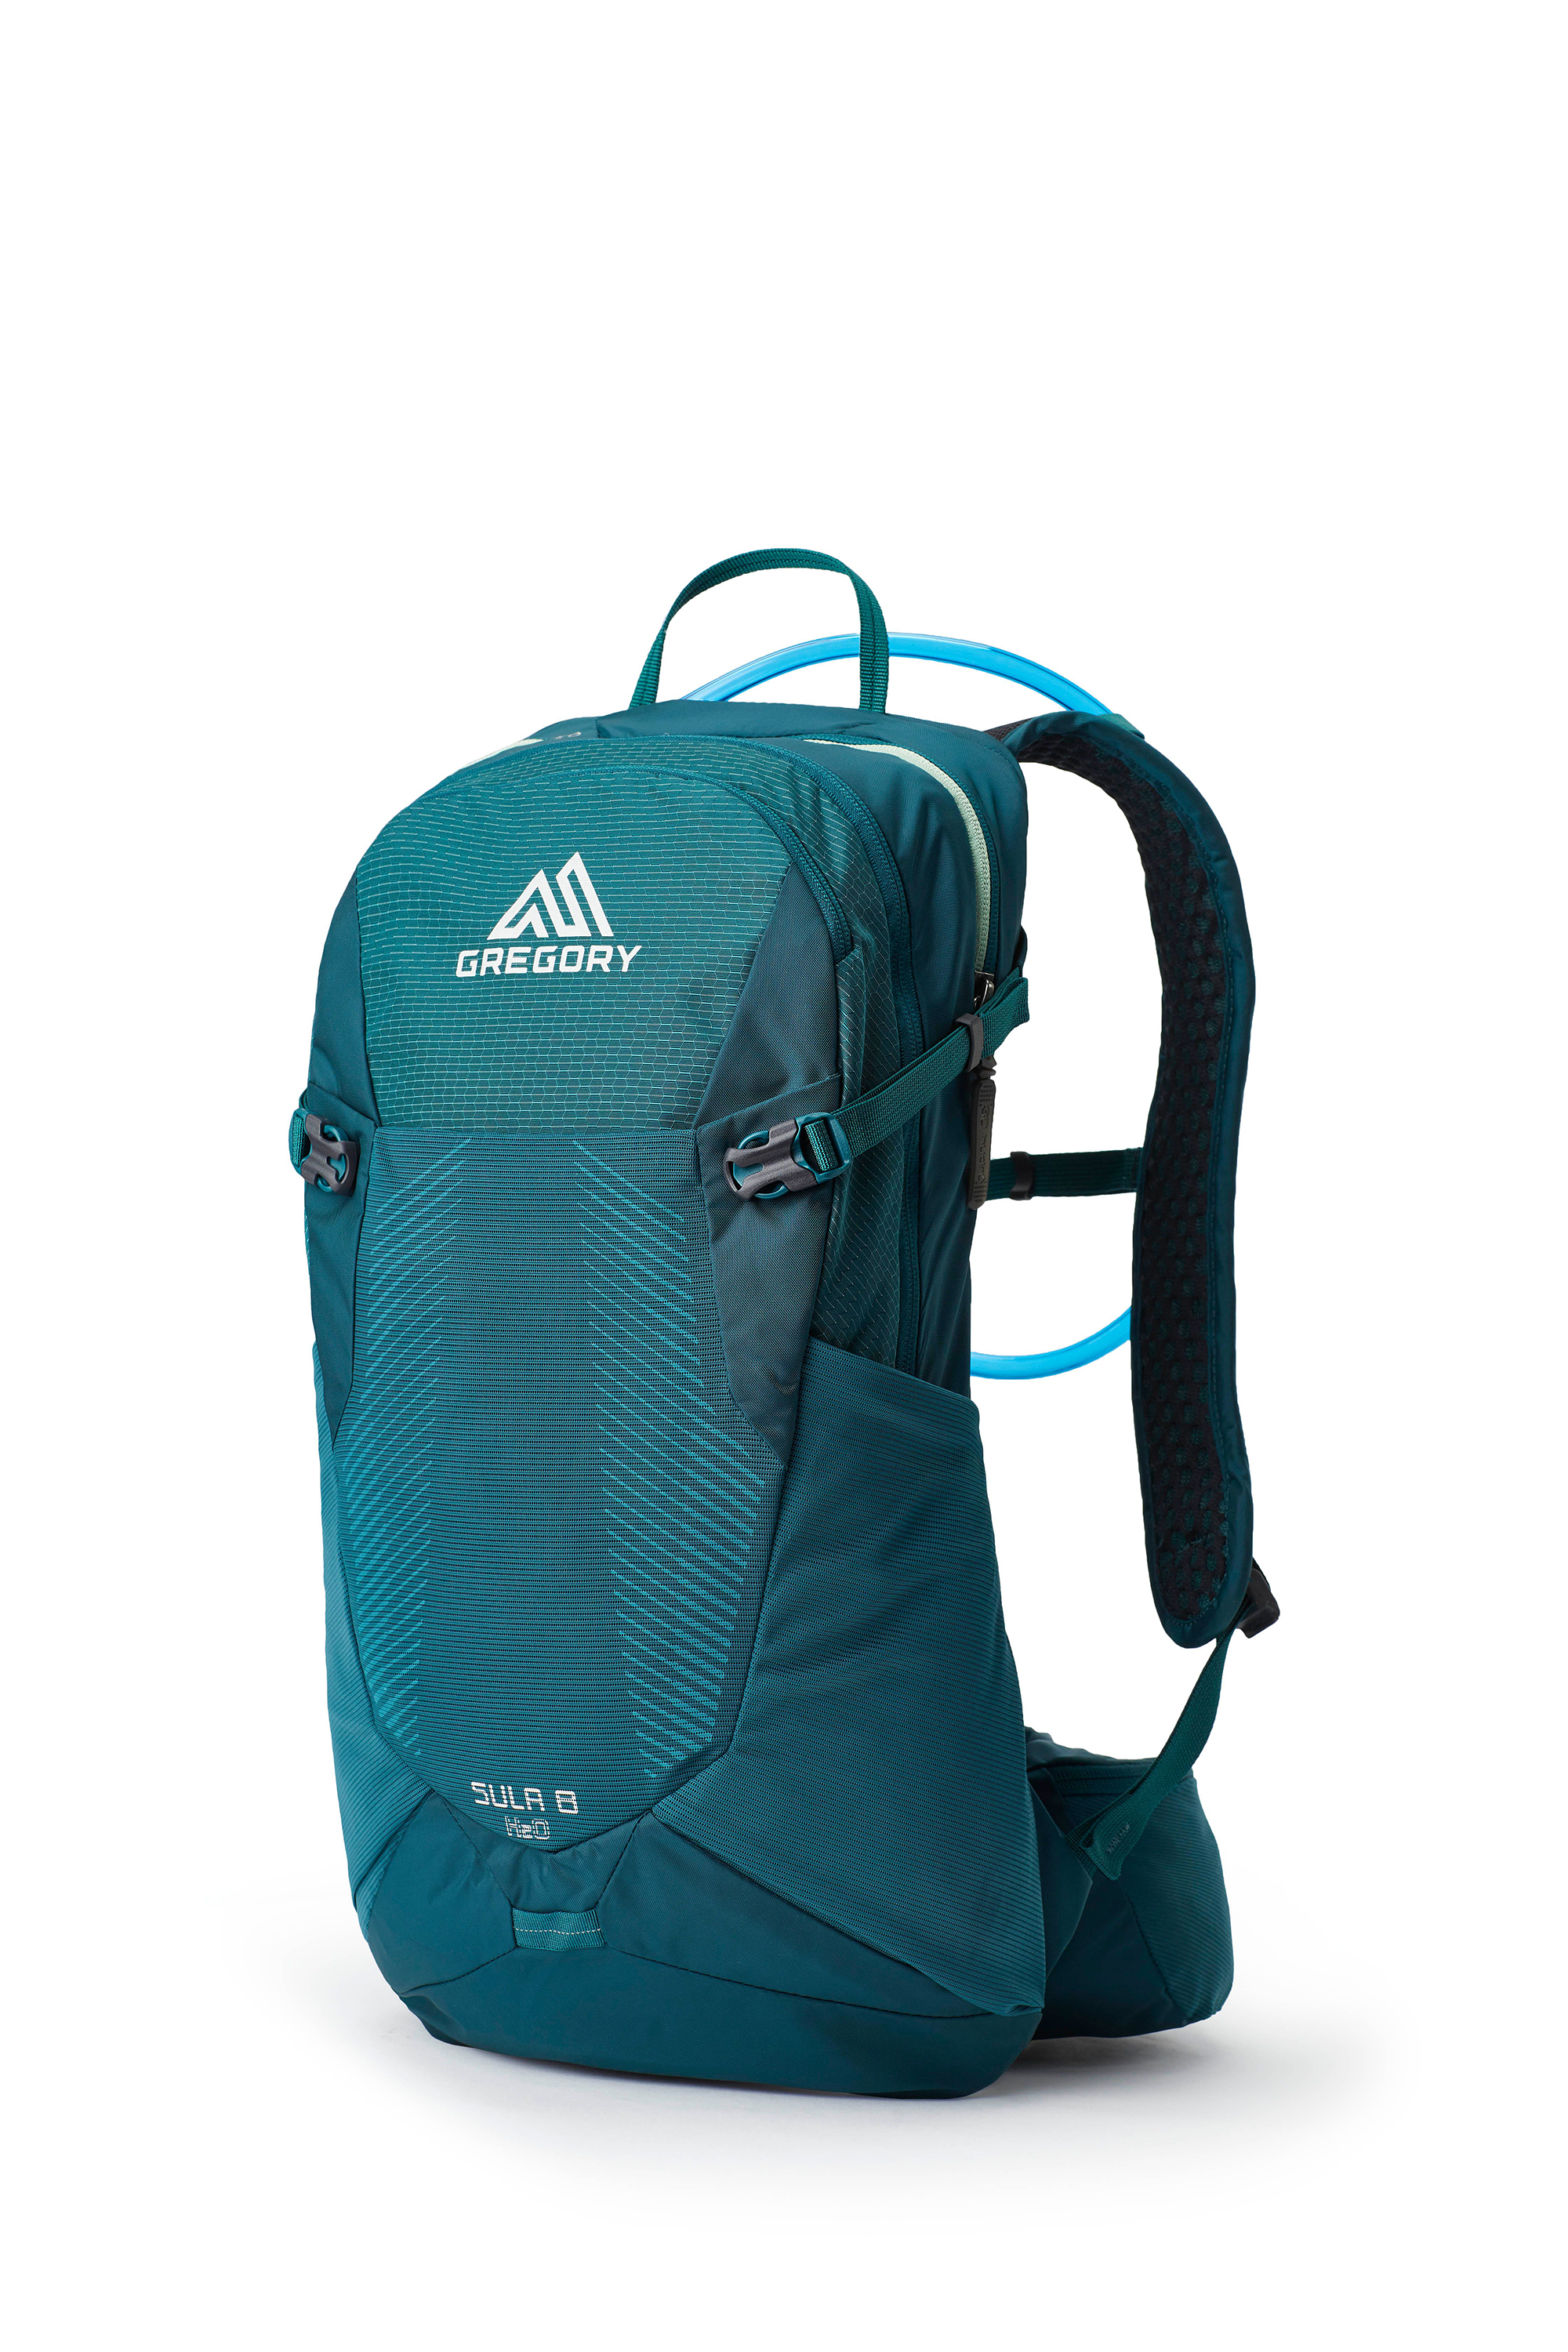 Gregory Sula 8 H2O Hydration Pack for Ladies - Antigua Green